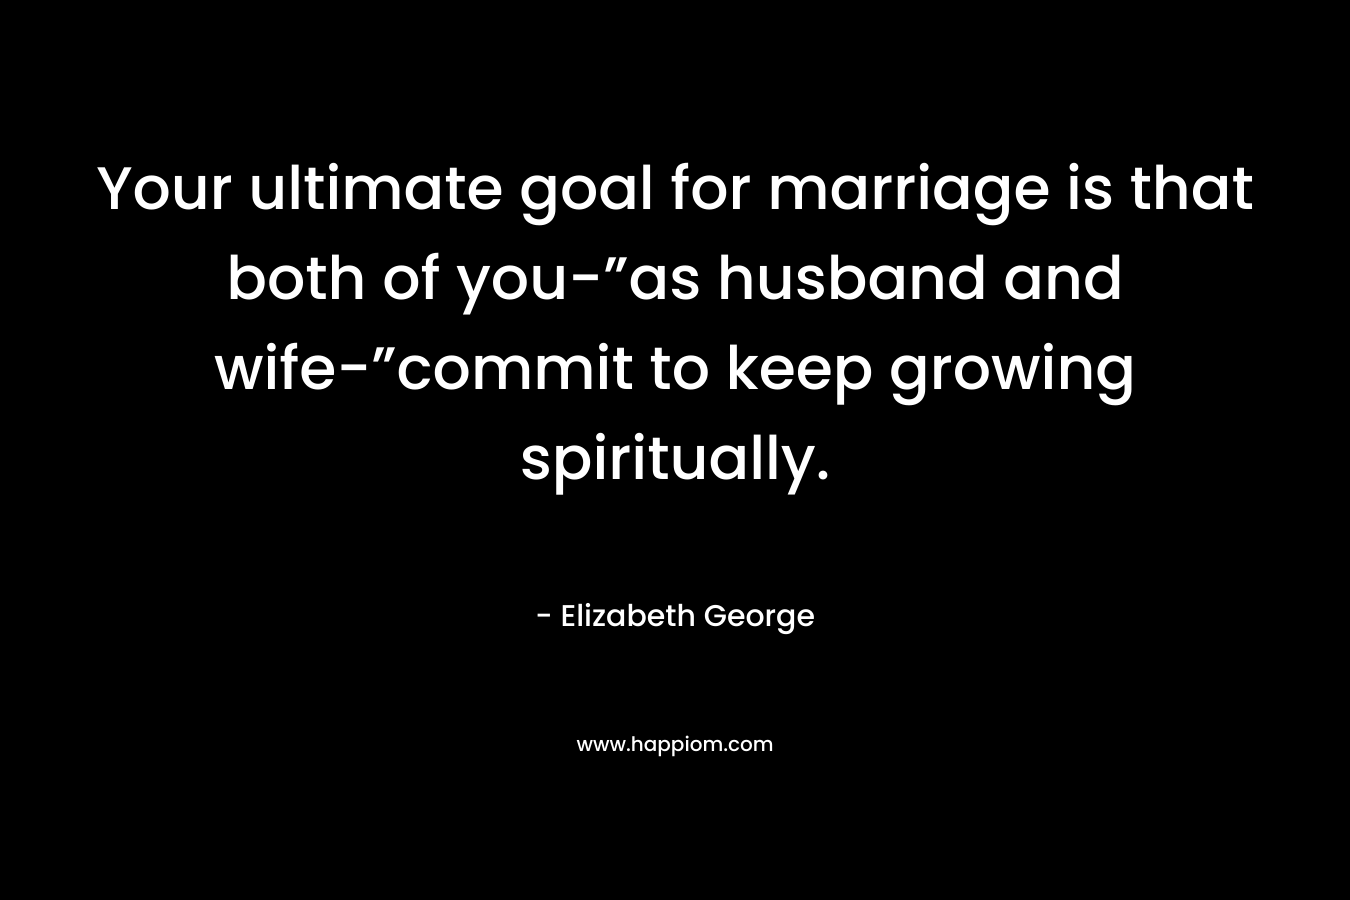 Your ultimate goal for marriage is that both of you-”as husband and wife-”commit to keep growing spiritually. – Elizabeth George